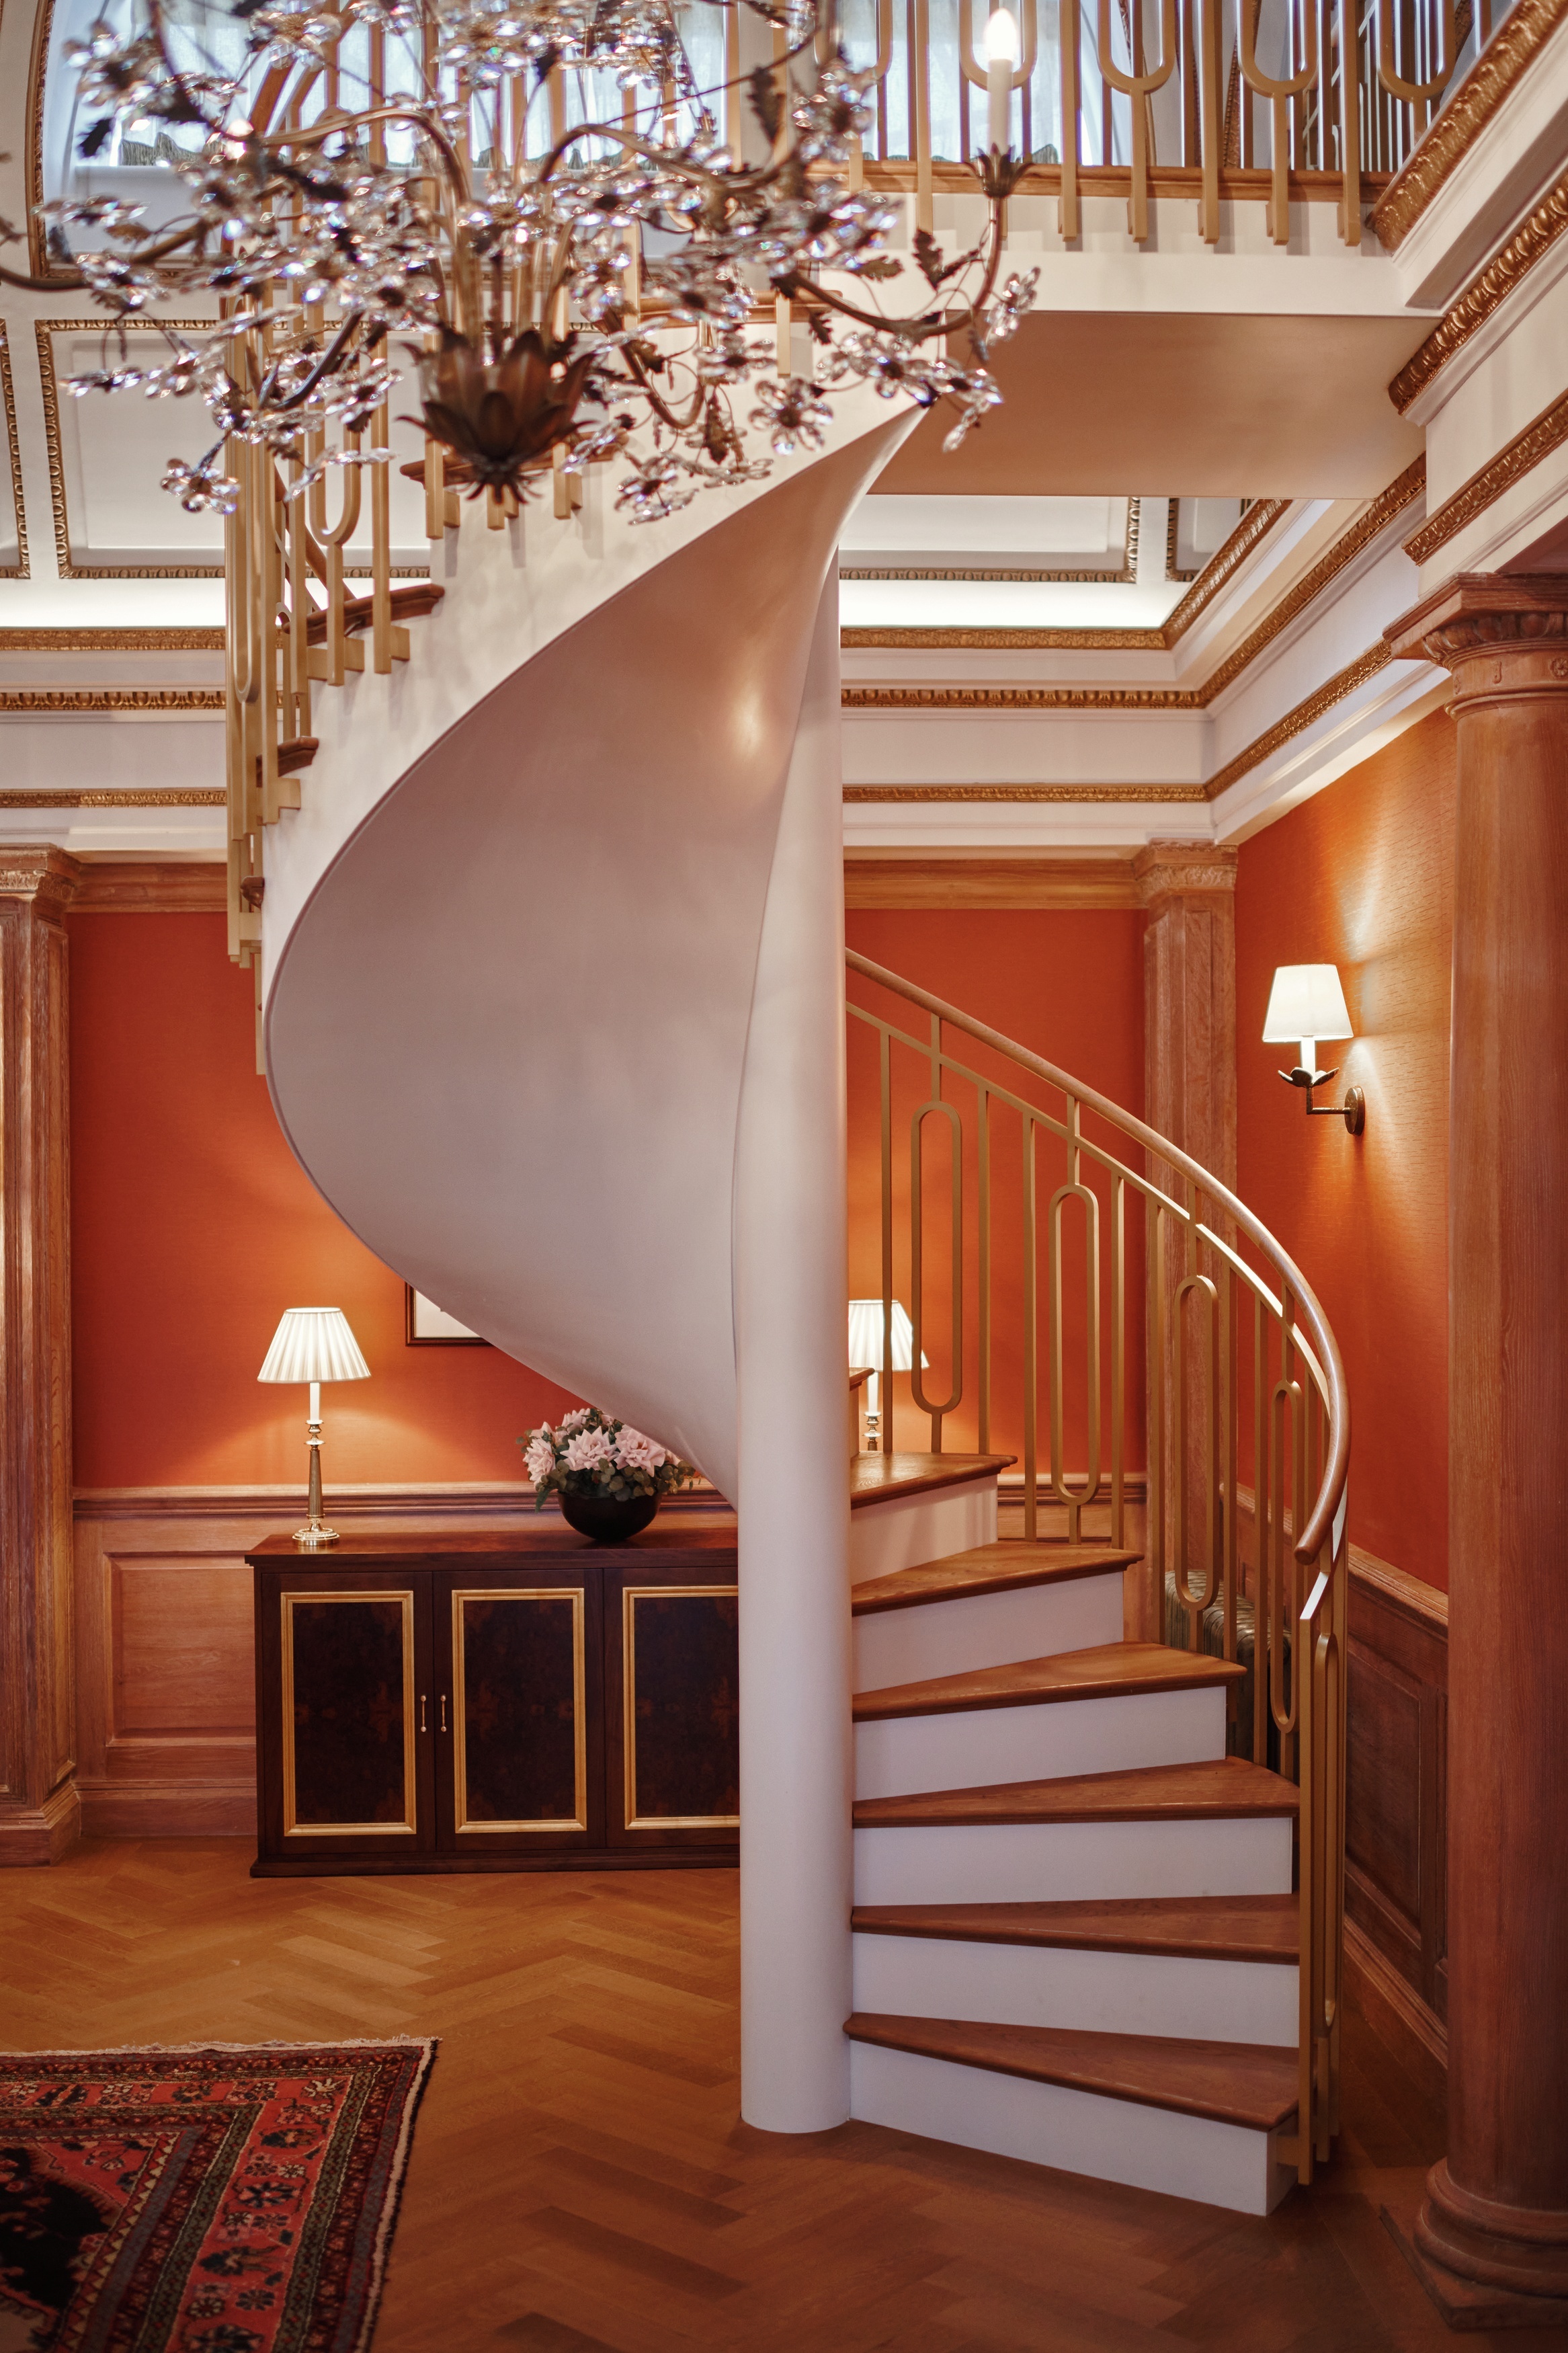 A spiral staircase links two levels of the duplex at The Astor duplex